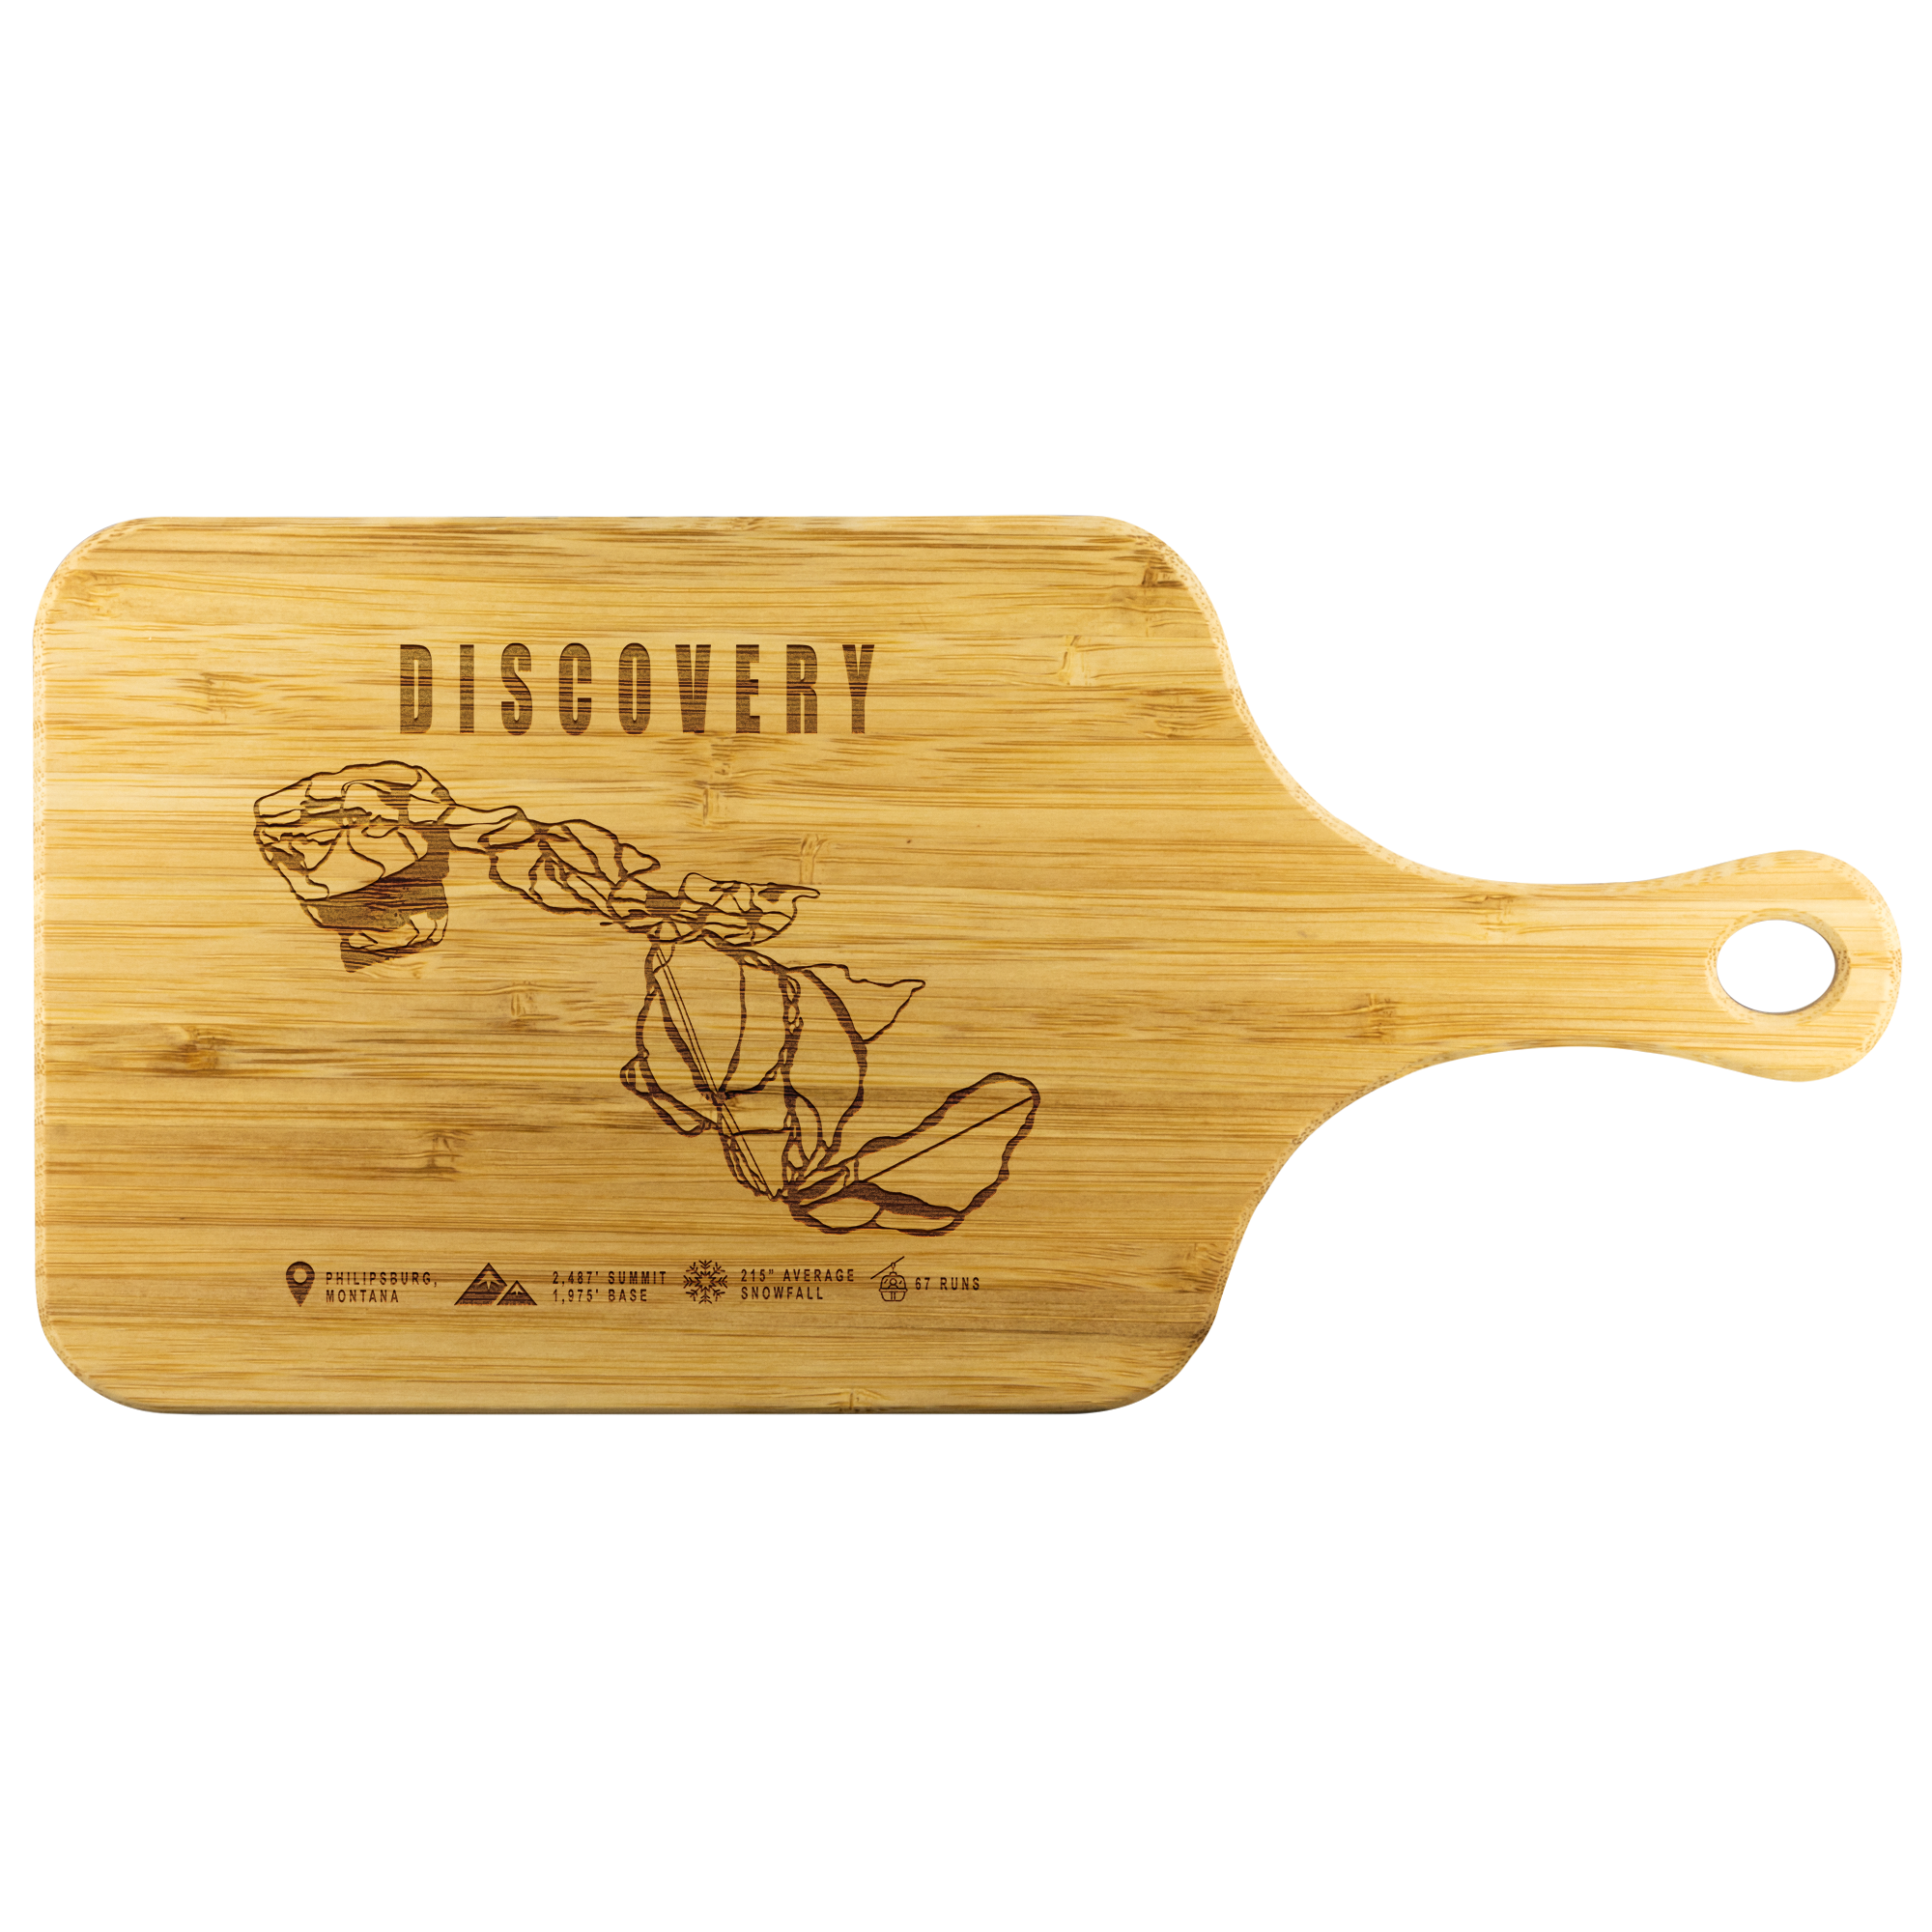 Discovery Montana Ski Trail Map Bamboo Cutting Board With Handle - Powderaddicts